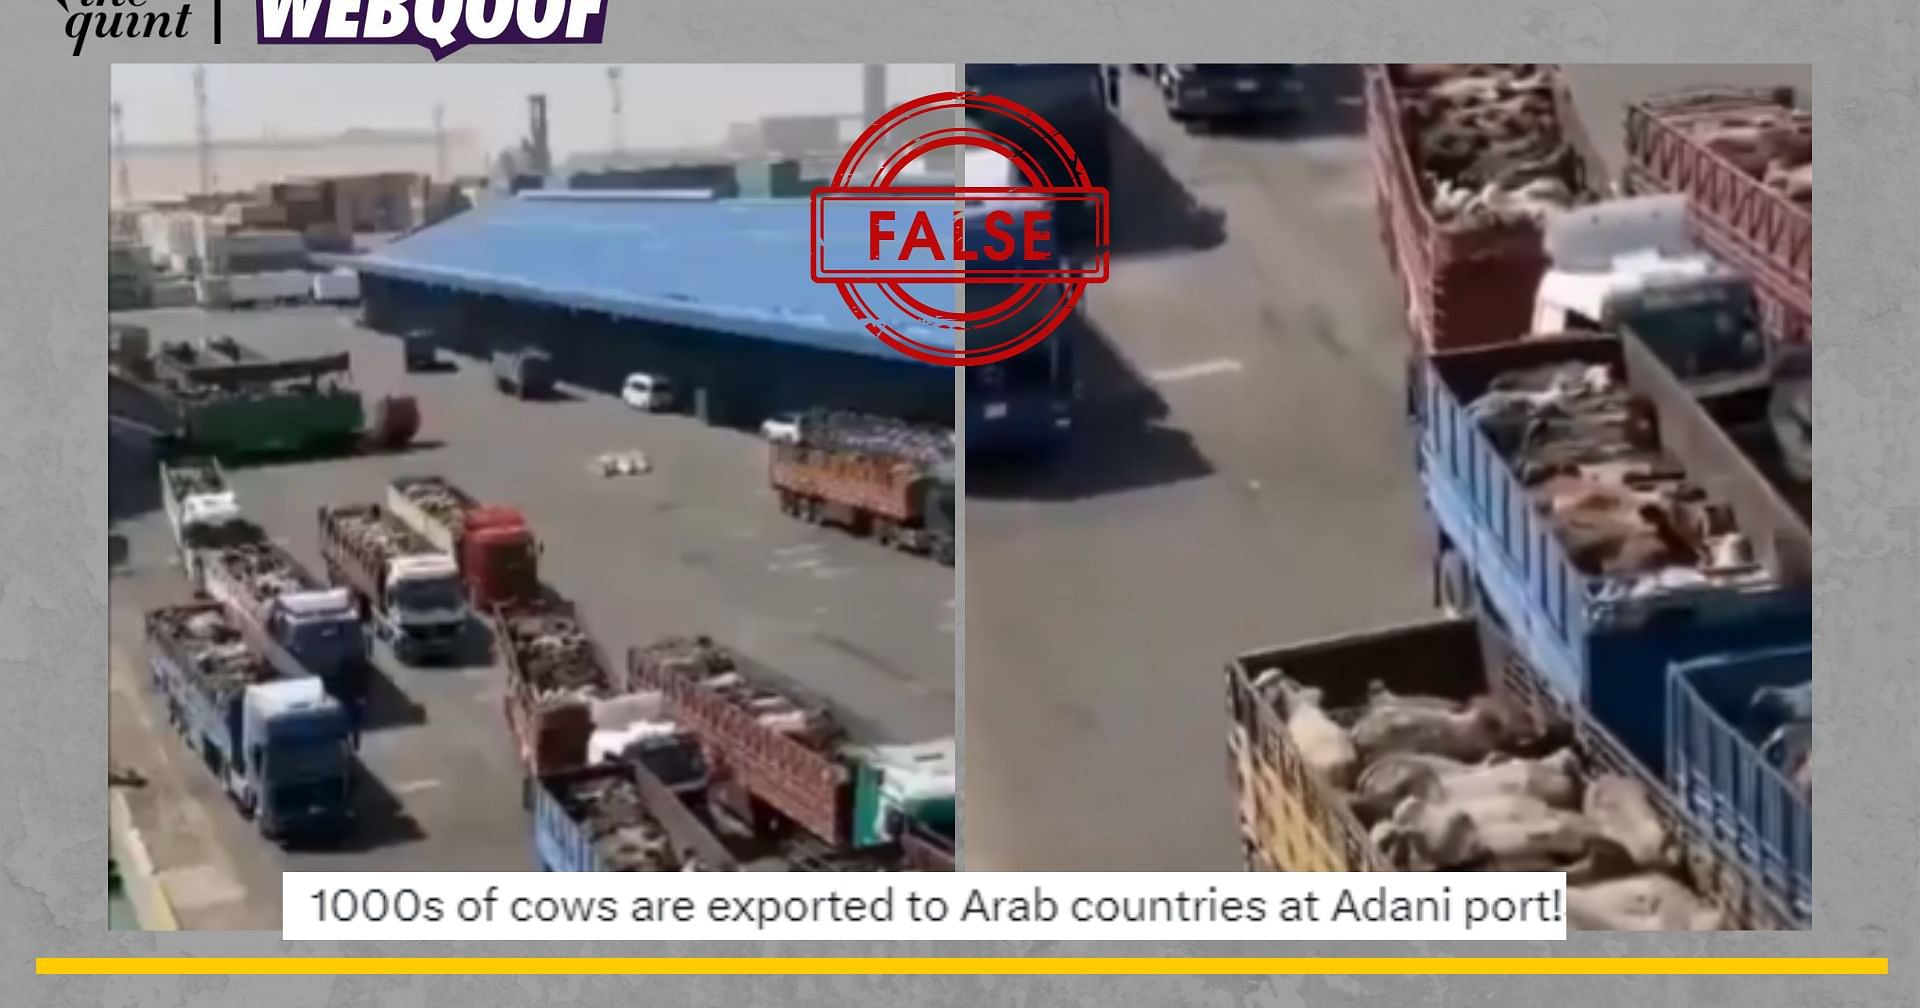 Check | Does This Clip Show Cows Being Exported From Adani Port in Gujarat? A Fact-Check [Video]